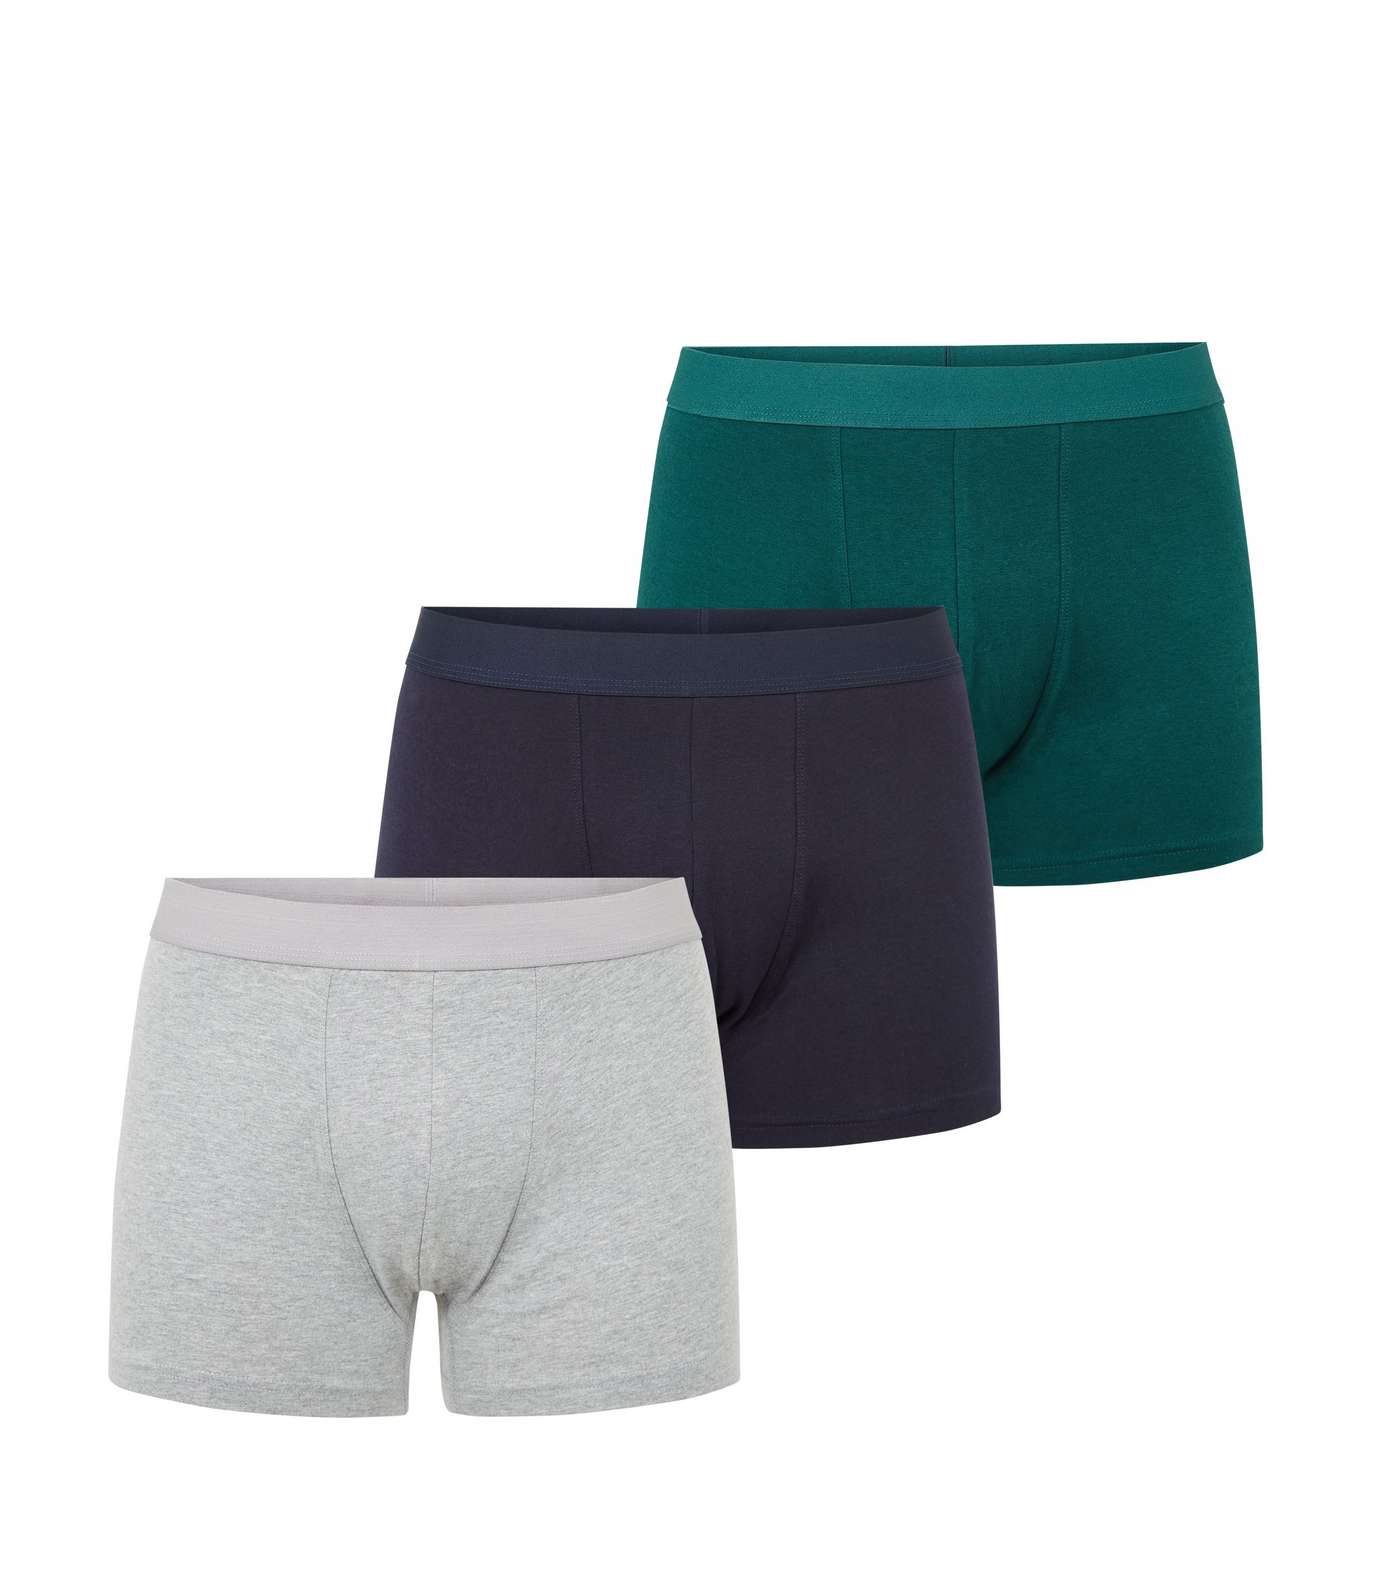 3 Pack Grey, Green and Navy Trunks Image 2